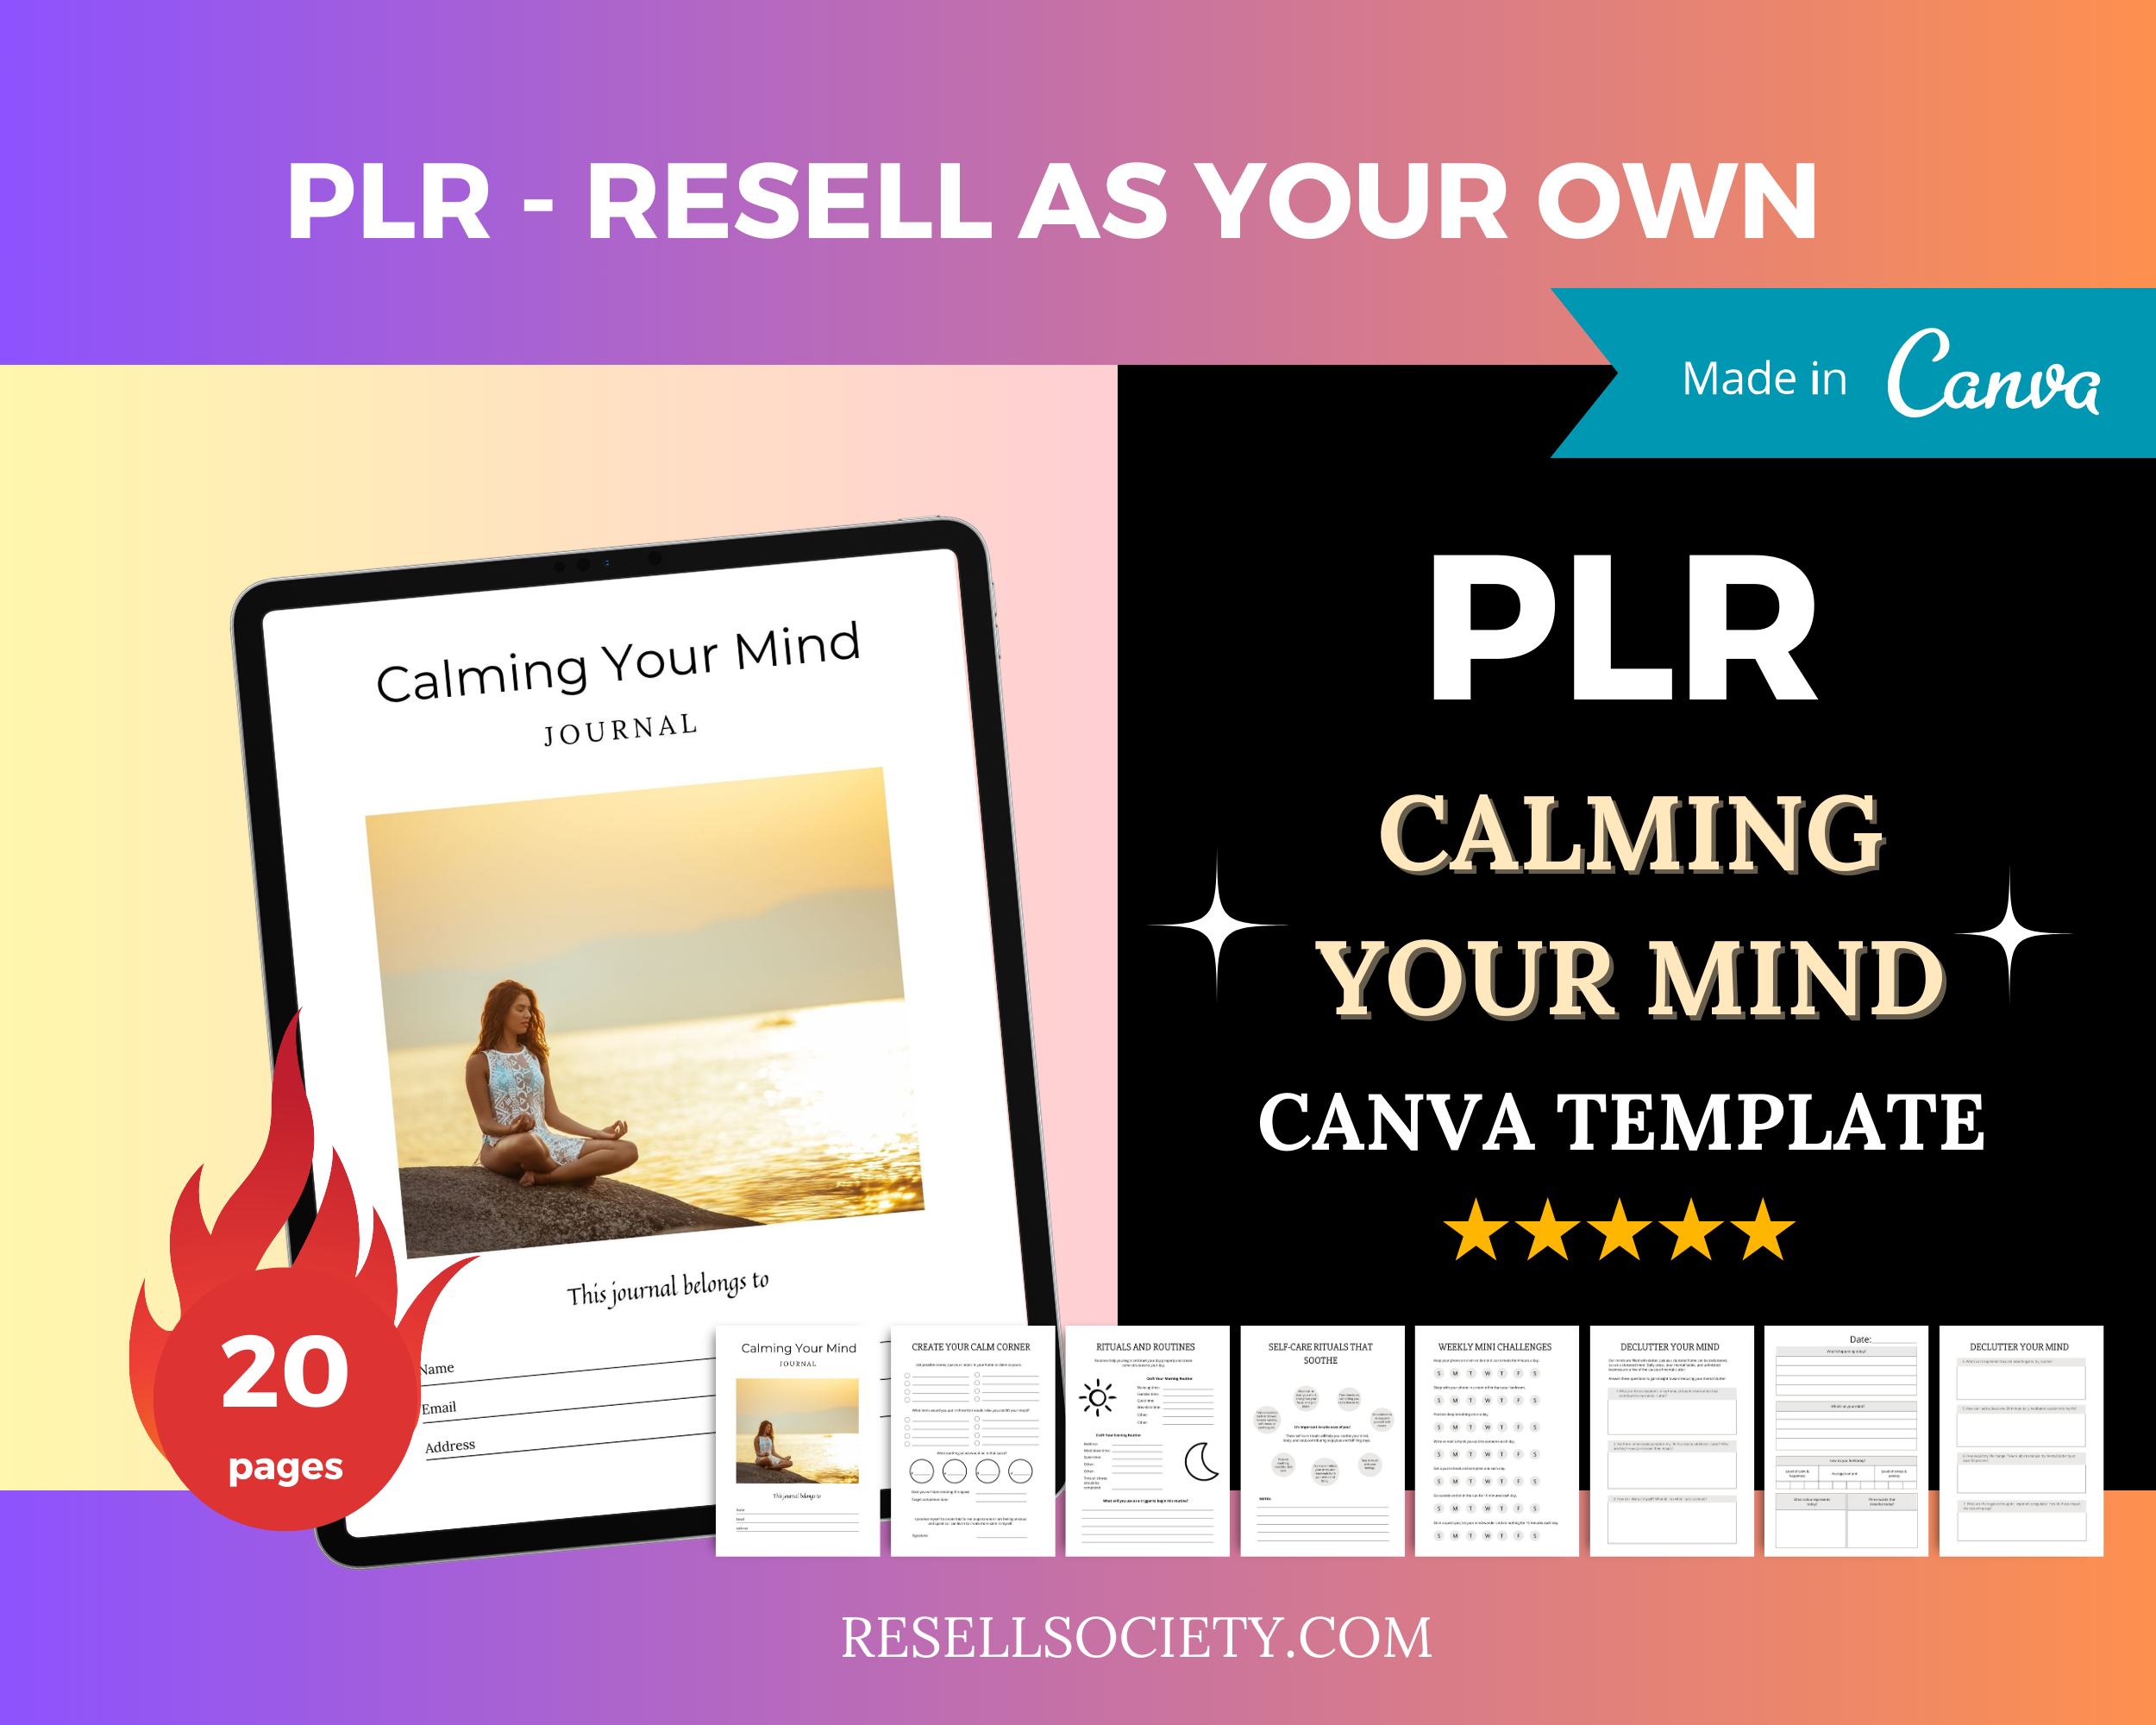 Editable Calming Your Mind Planner in Canva | Commercial Use